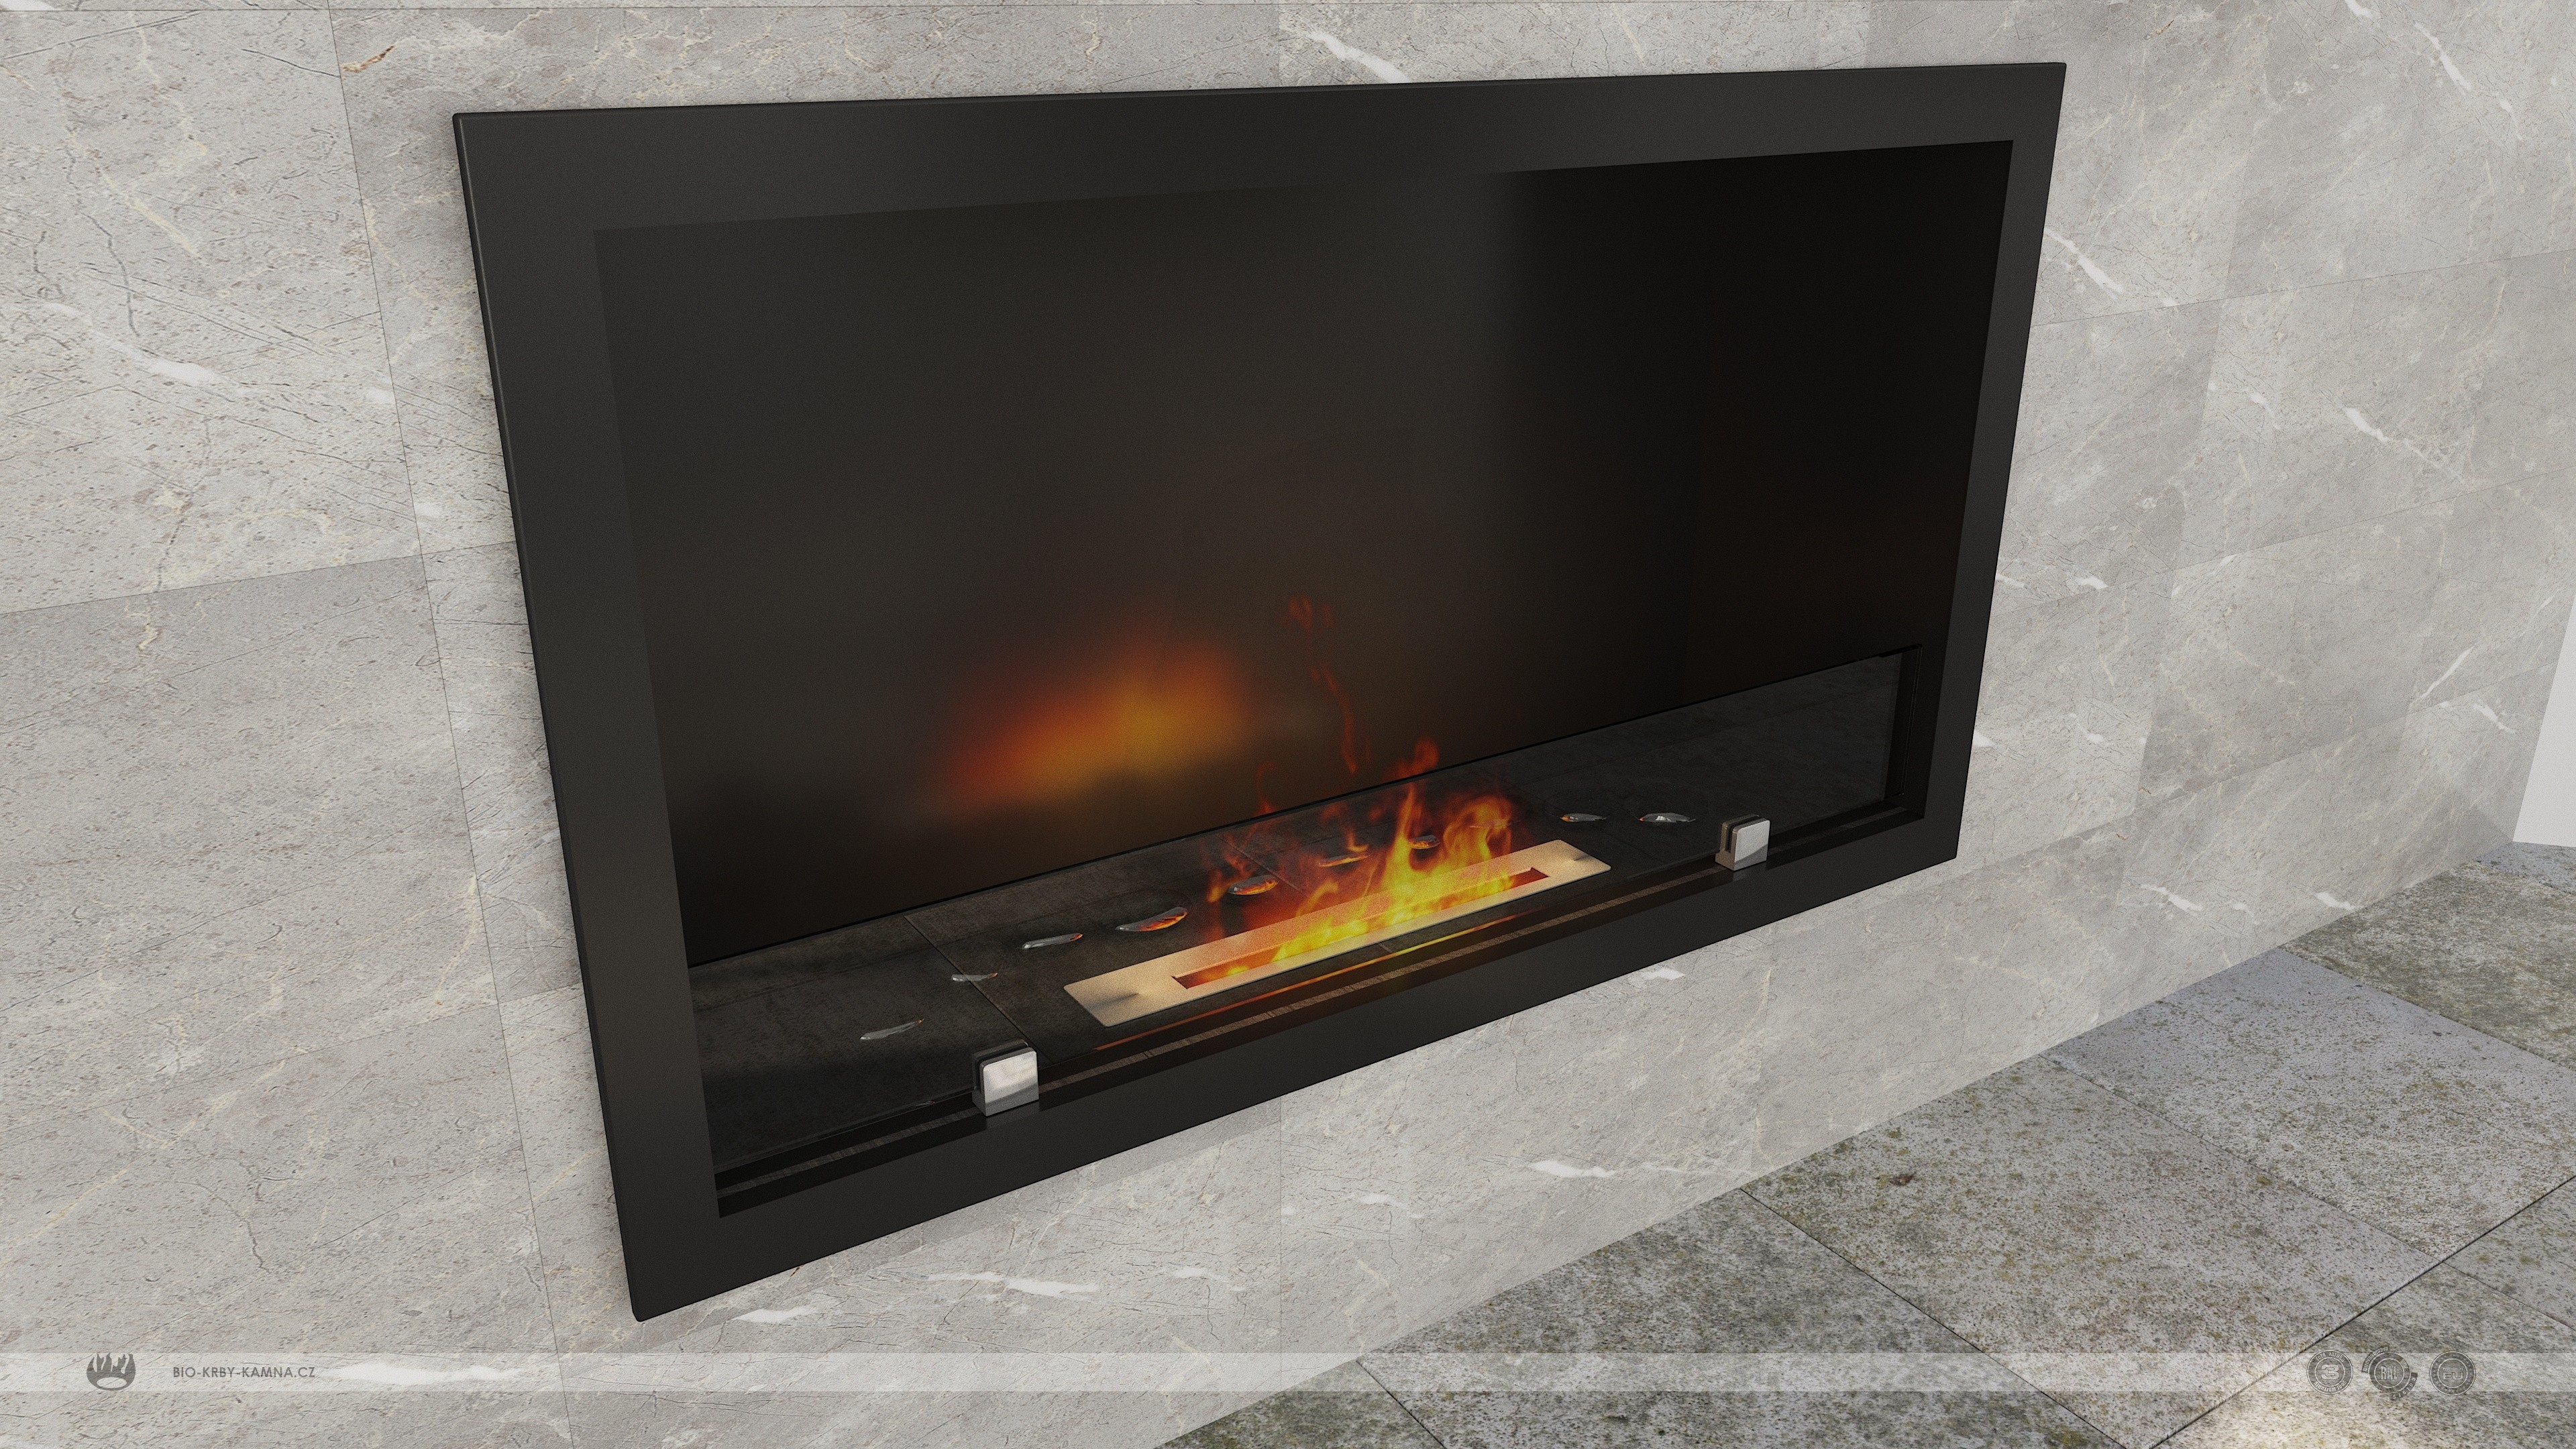 Fireplace without chimney AF-68